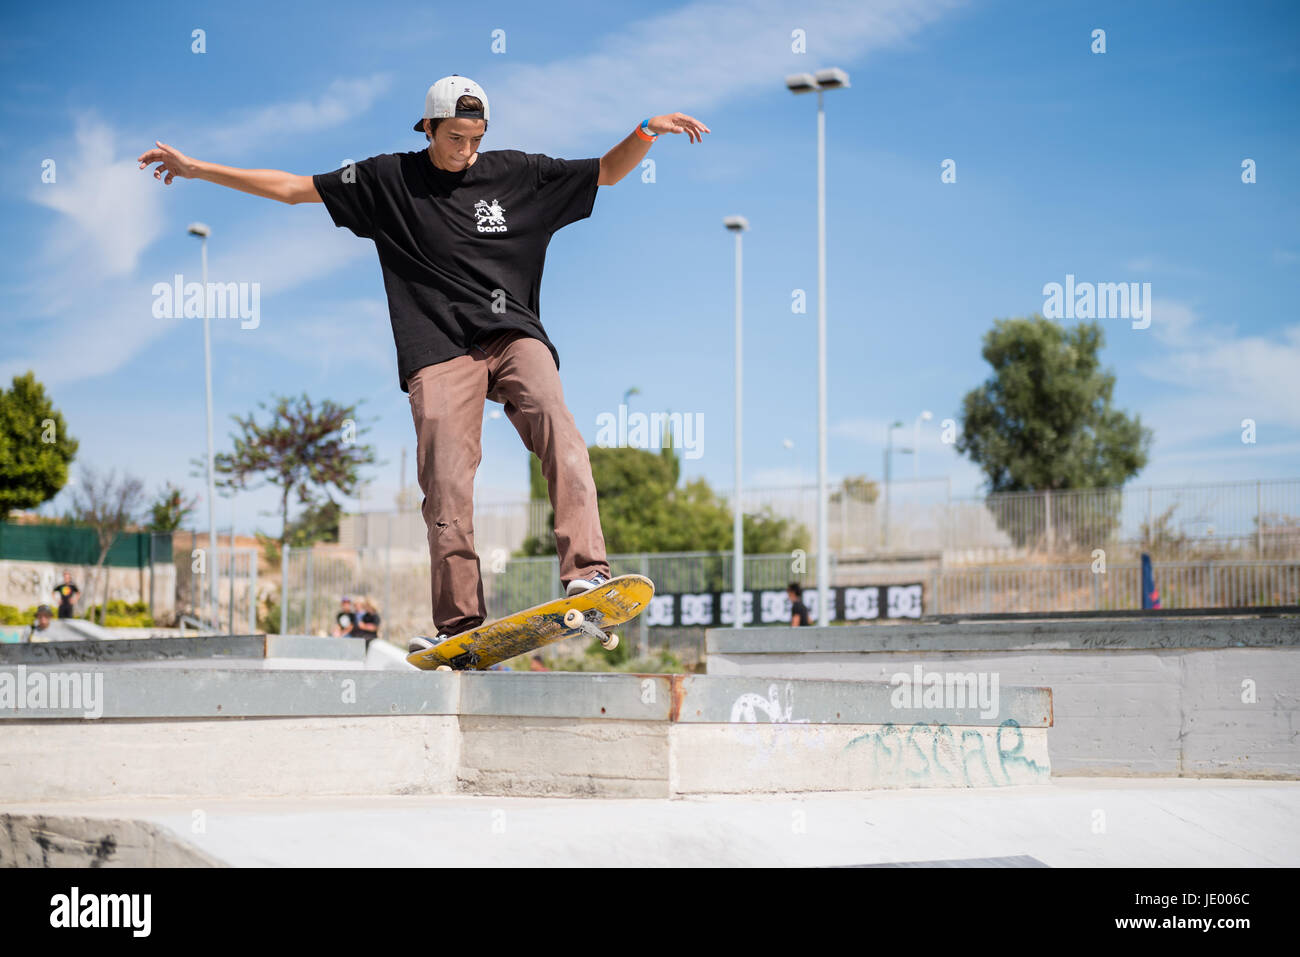 ALBUFEIRA, PORTUGAL - OCTOBER 5, 2014: Miguel Pinto during the 3rd Stage DC Skate Challenge by Fuel TV. Stock Photo